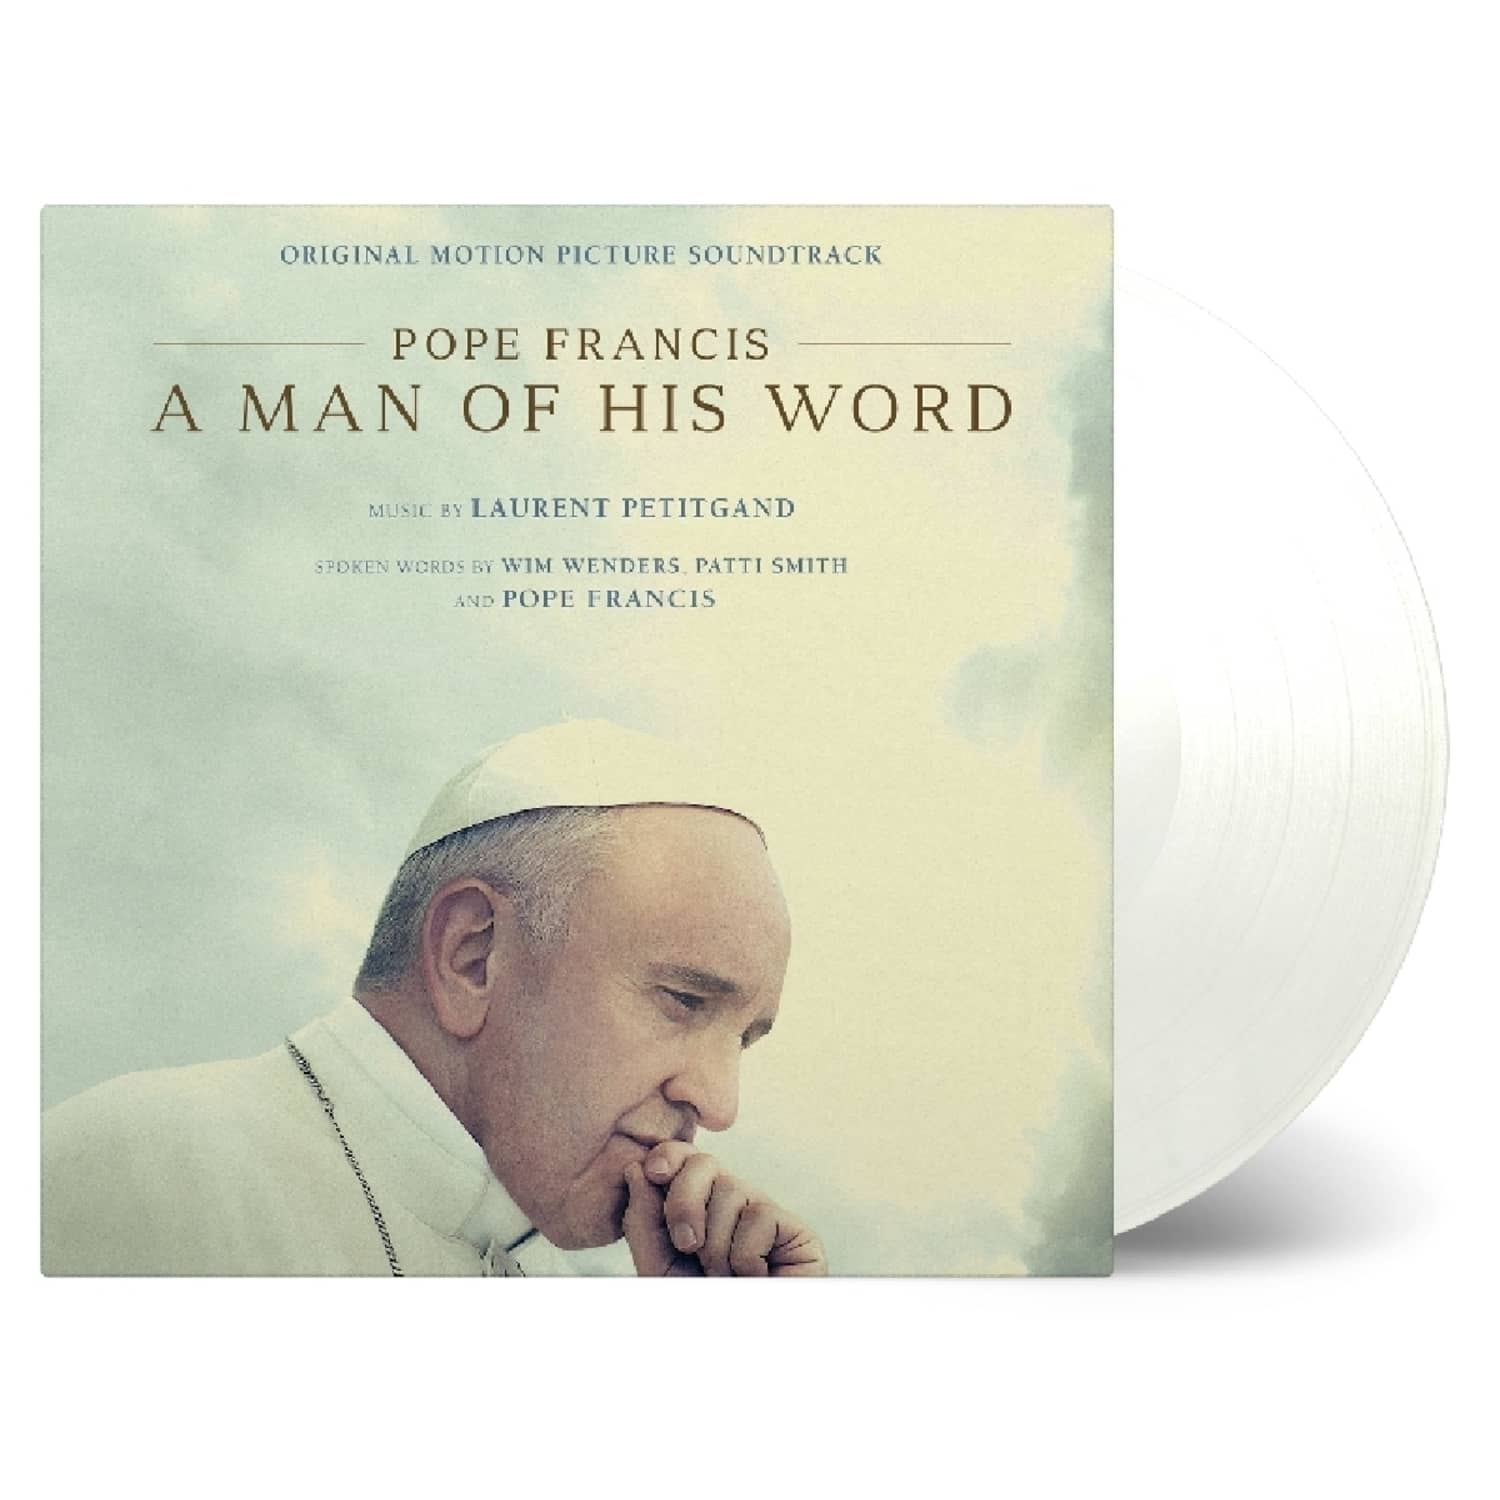 OST/Various - POPE FRANCIS A MAN OF HIS WORD 